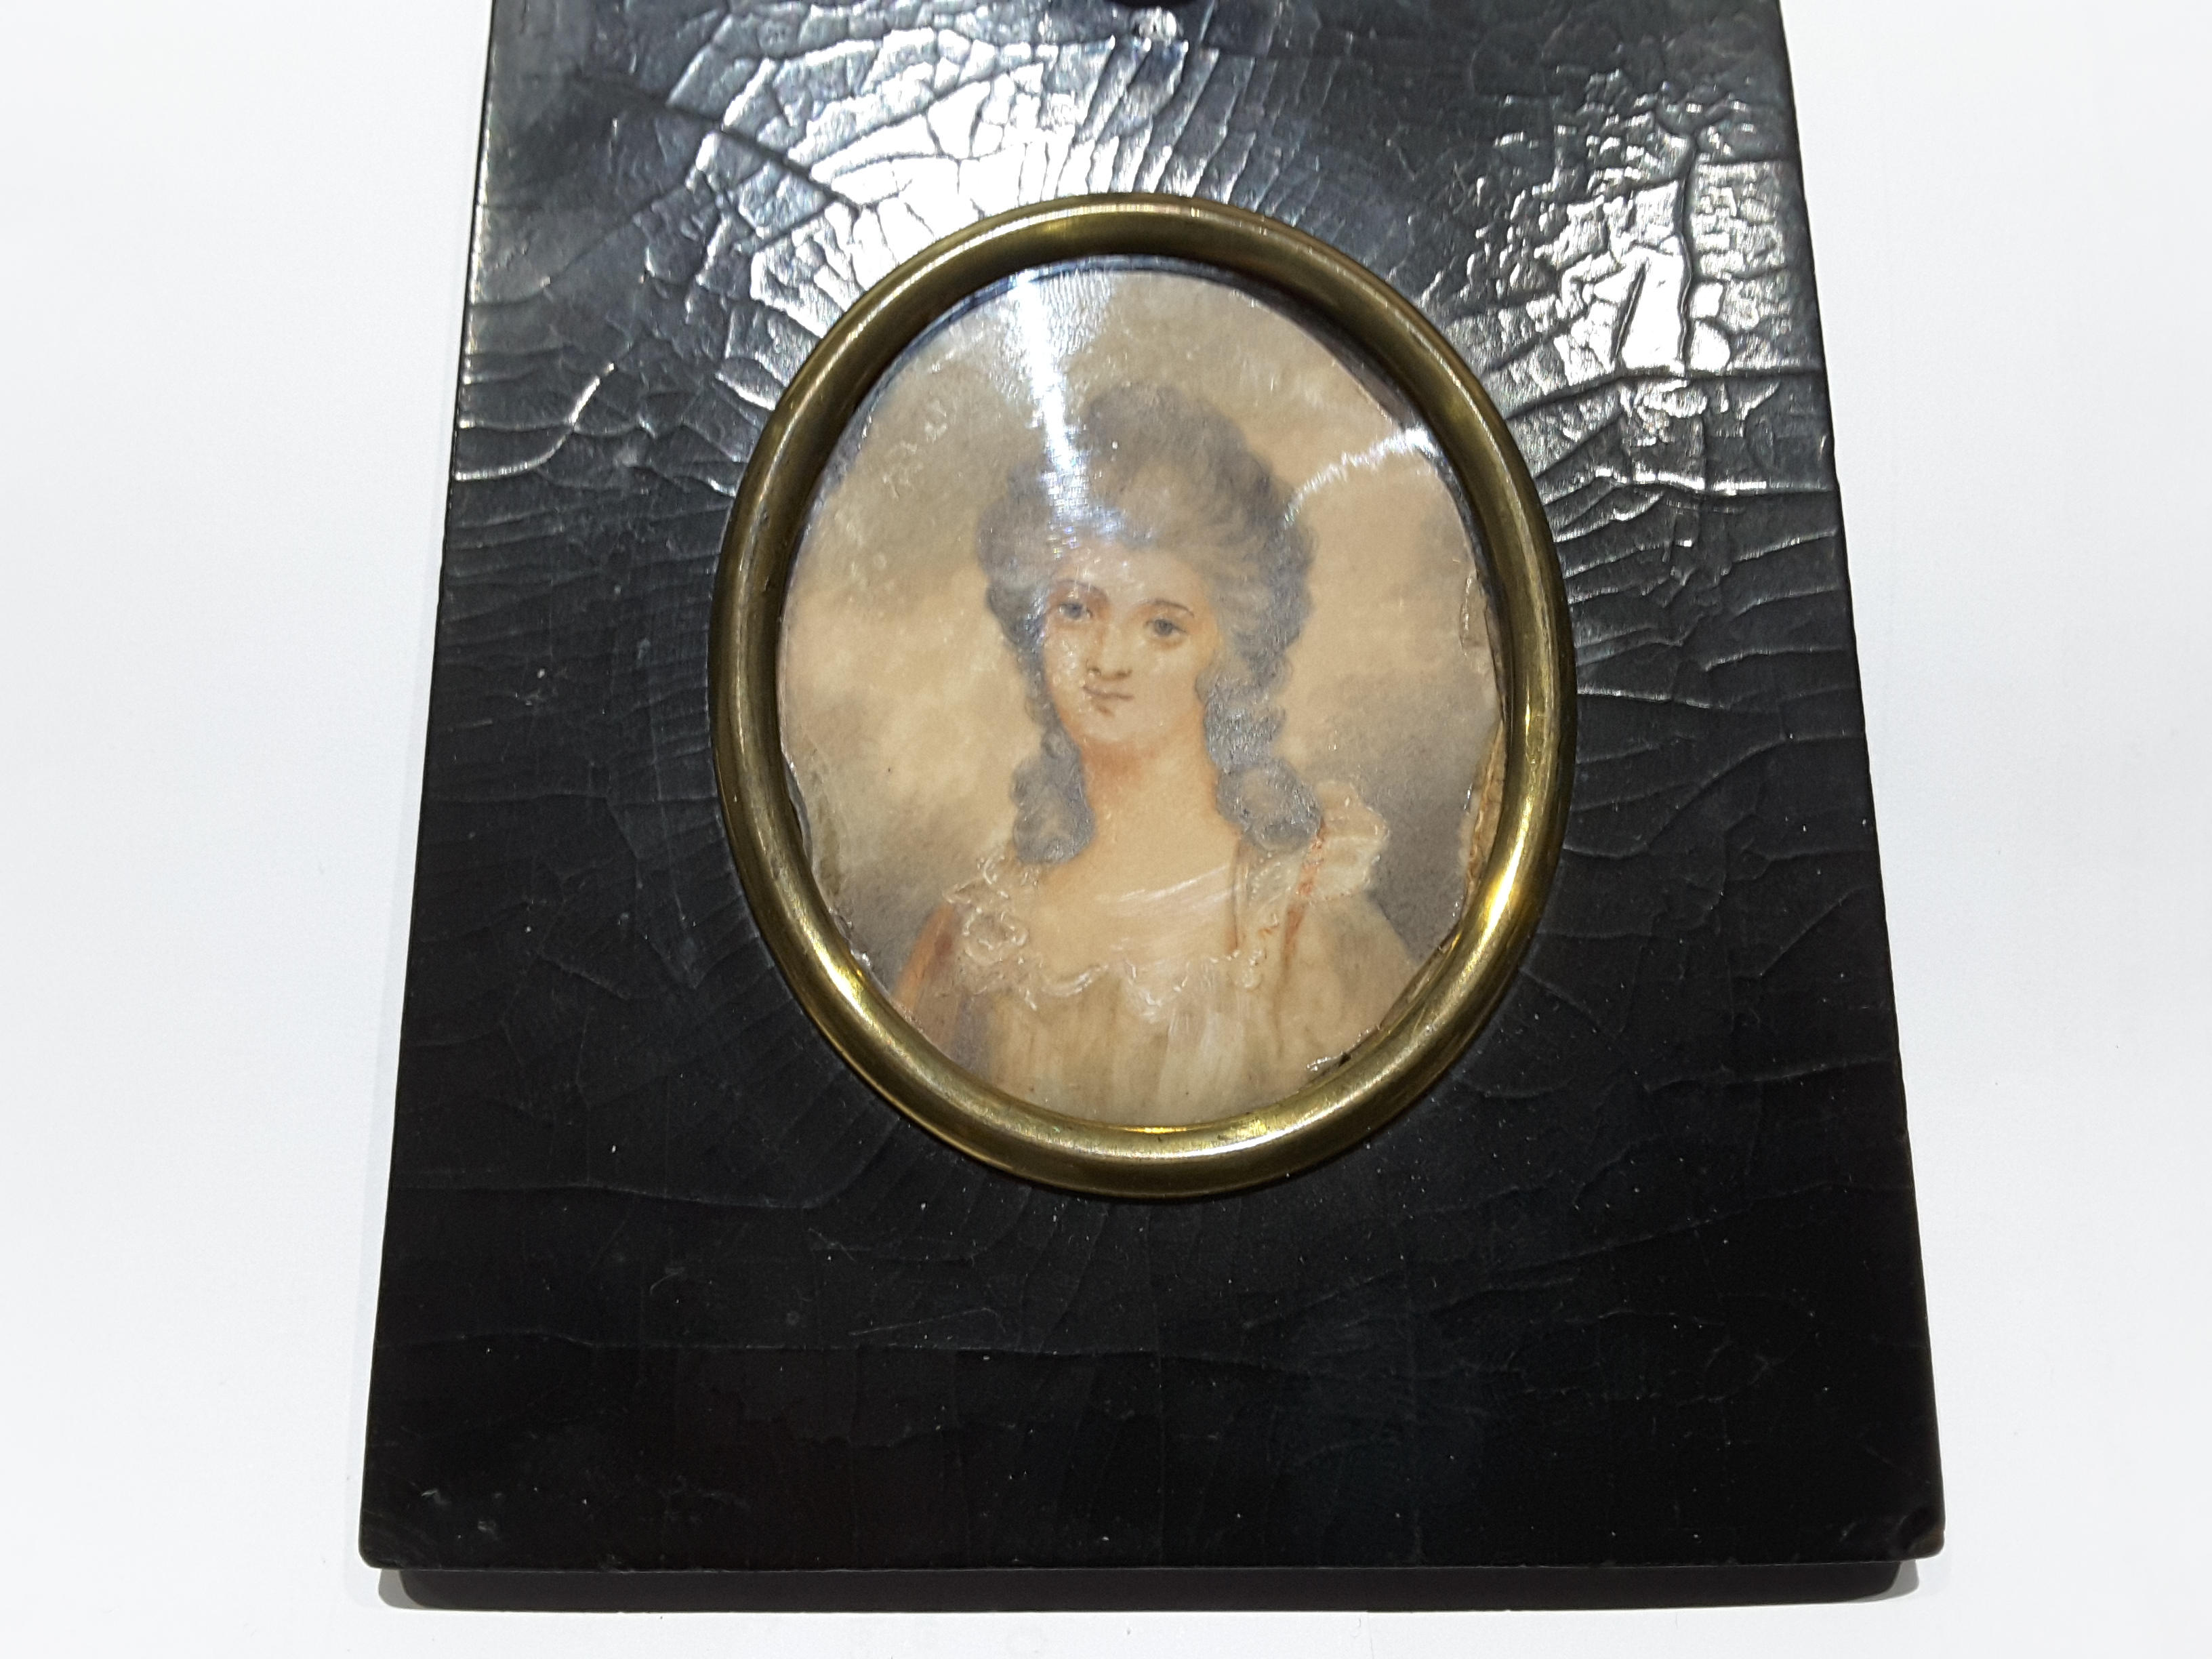 PORTRAIT MINIATURE OF AN 18th CENTURY LADY - Image 6 of 6